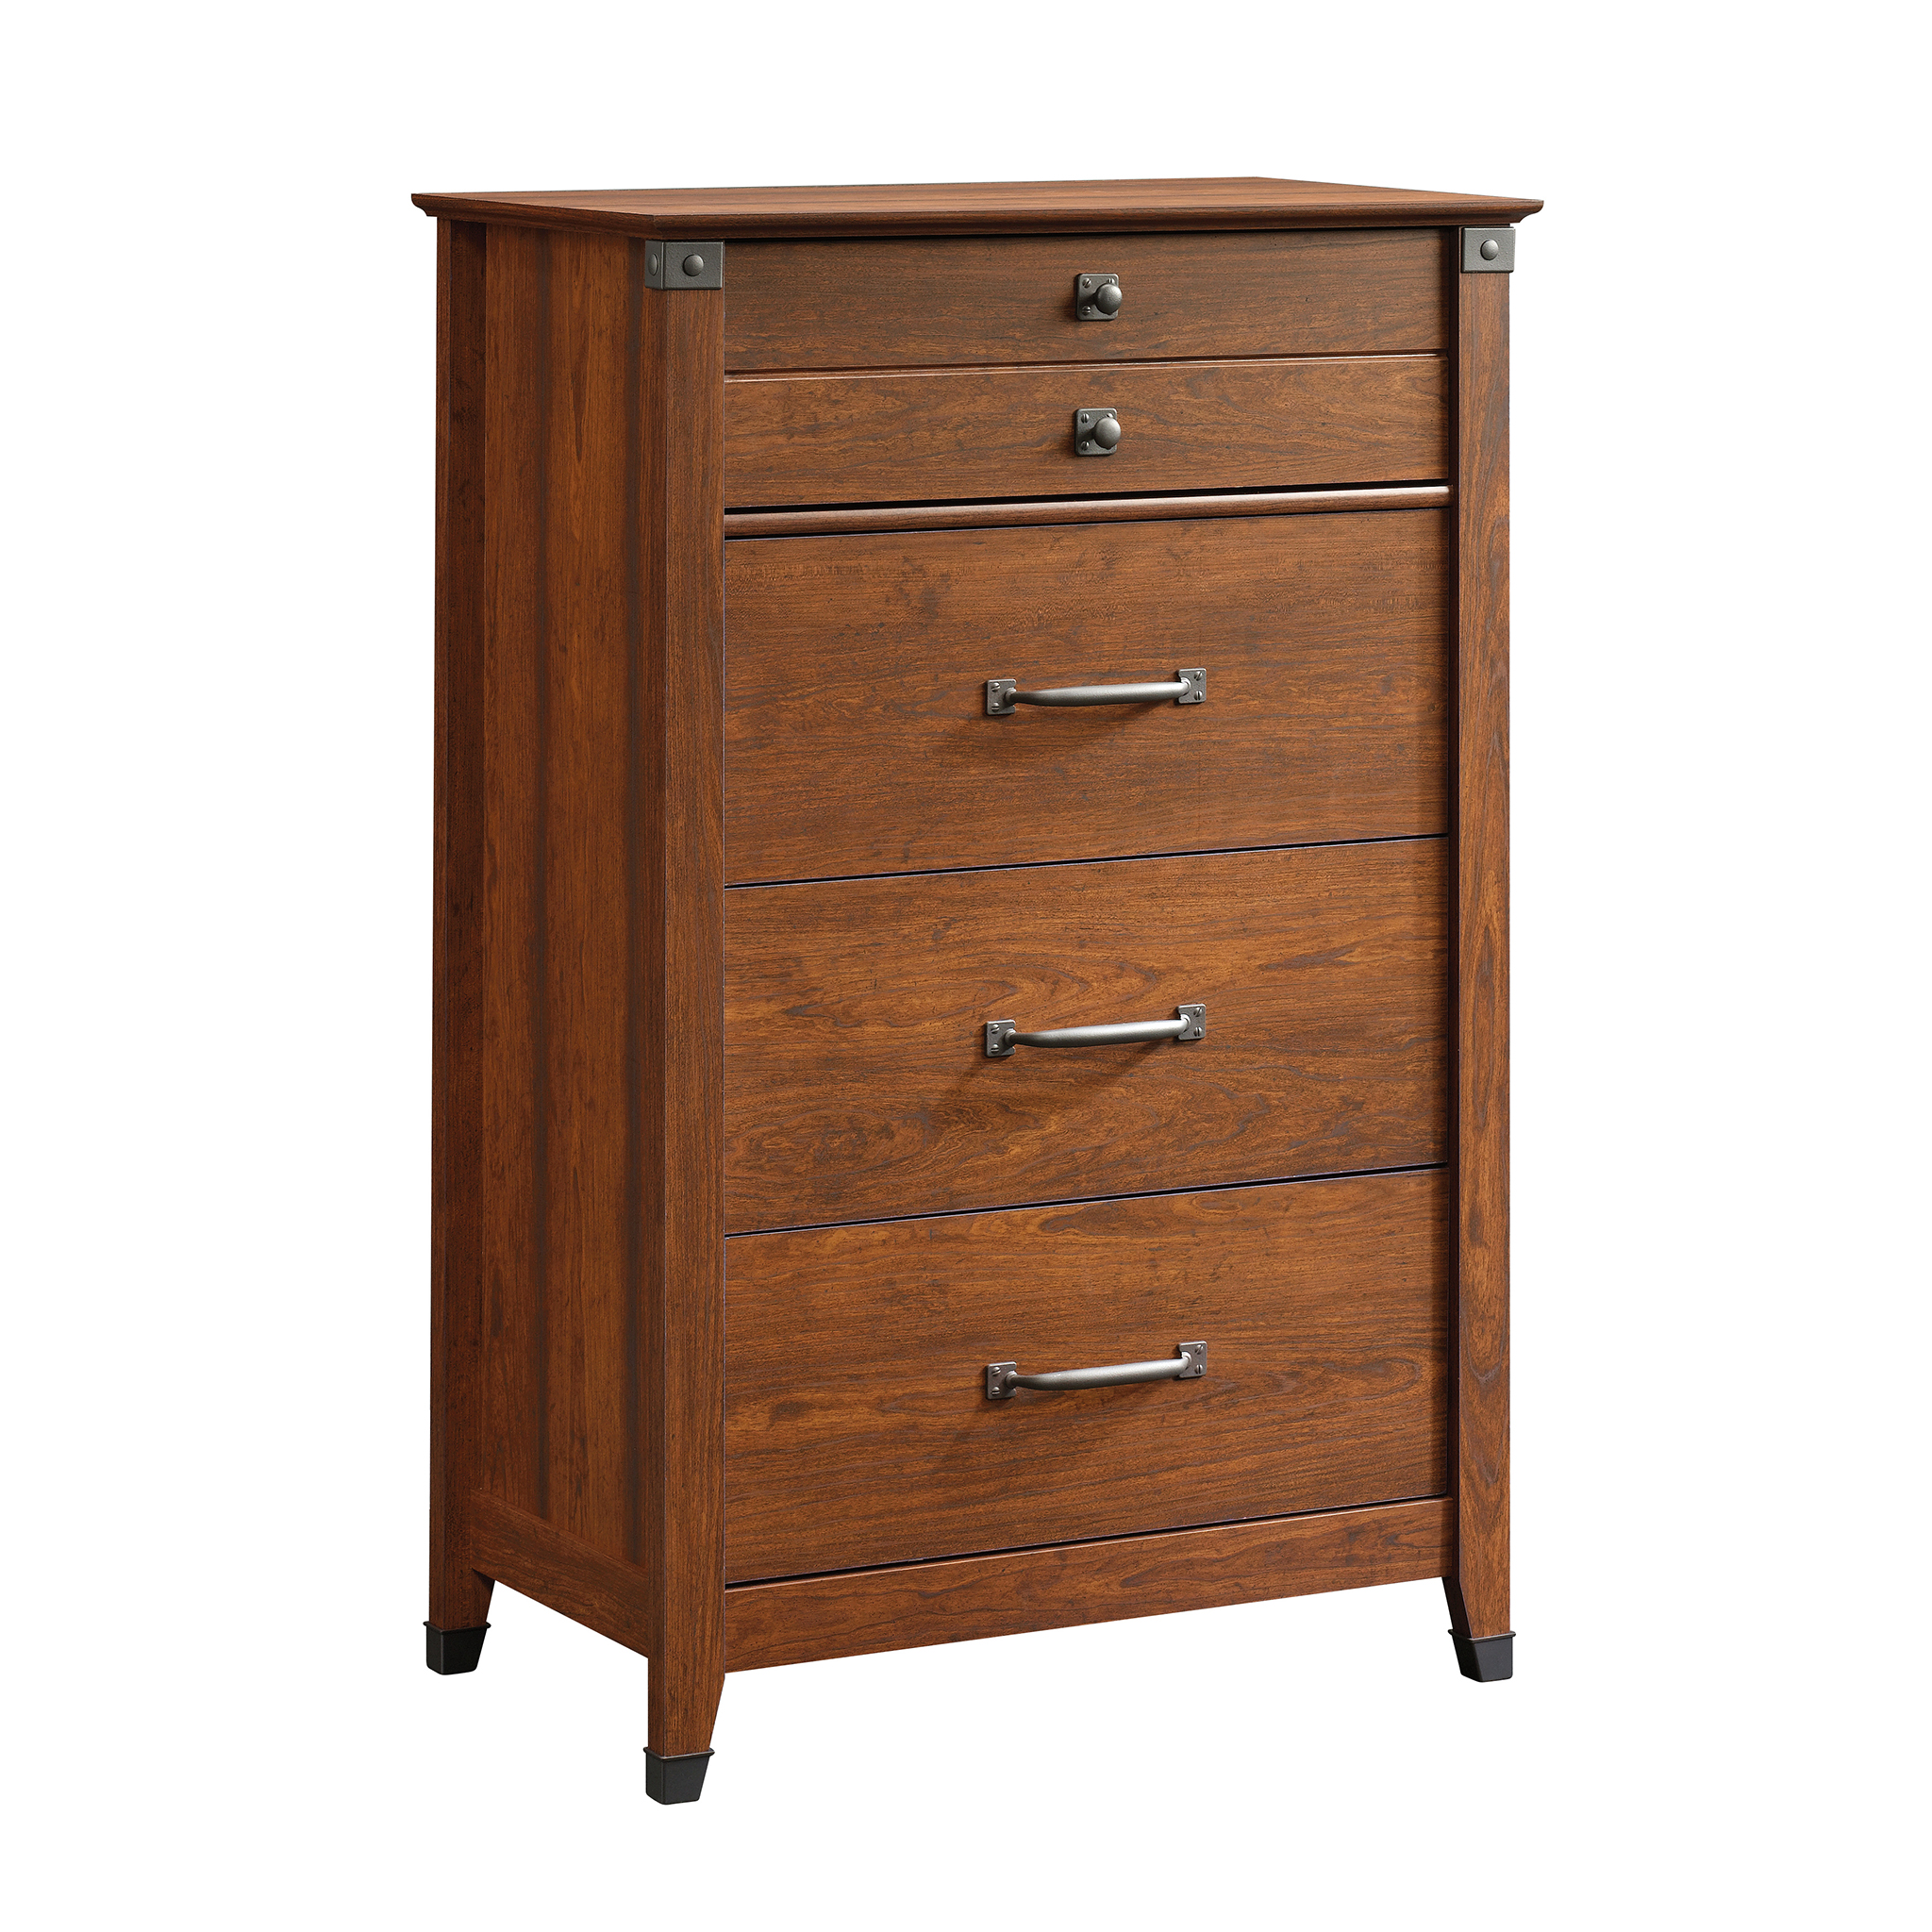 Sauder Carson Forge 4-Drawer Chest Wc